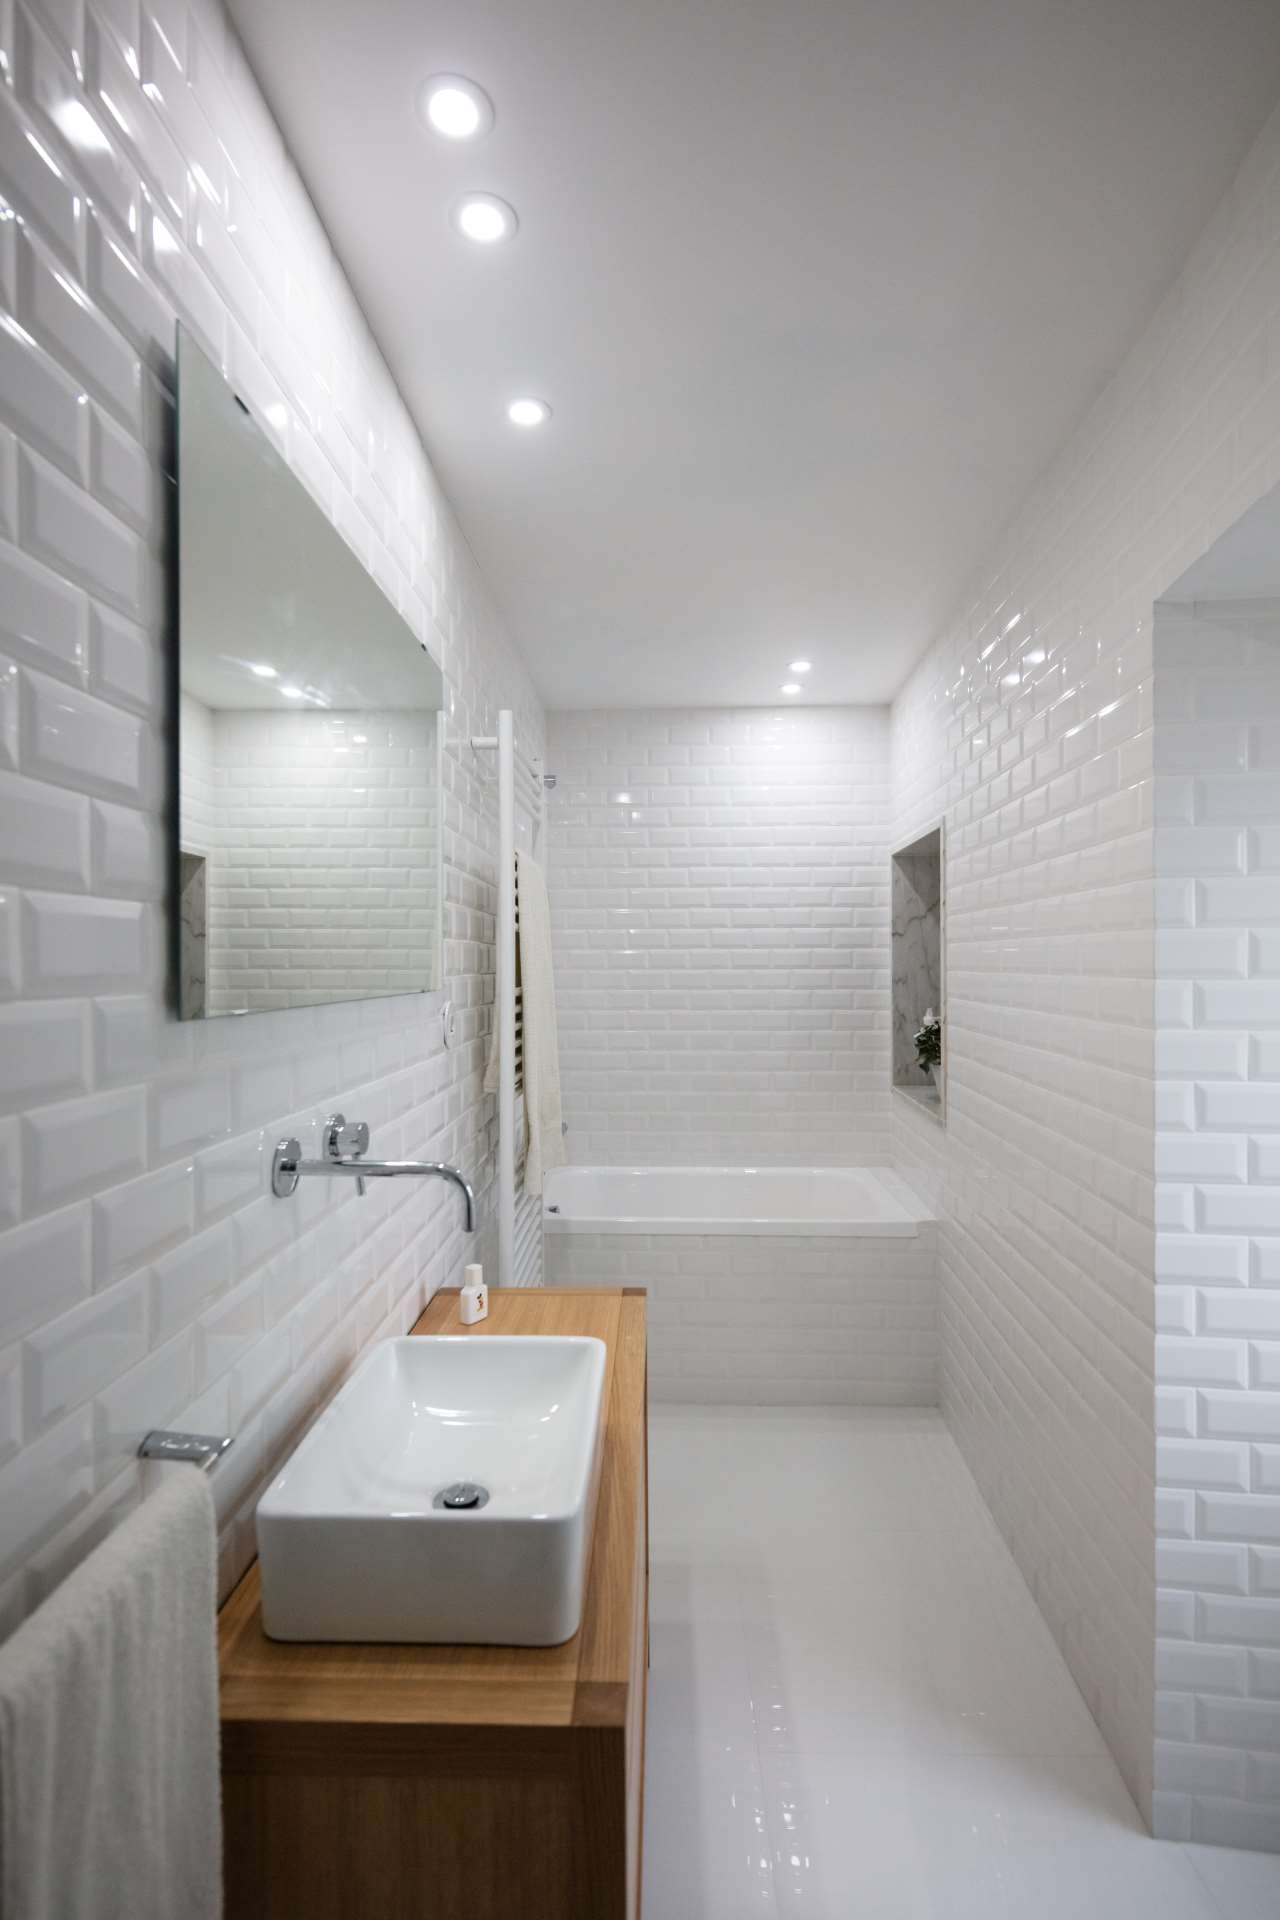 The bathroom is fully done in white, with chic tiles, a wooden vanity and a built in bathtub